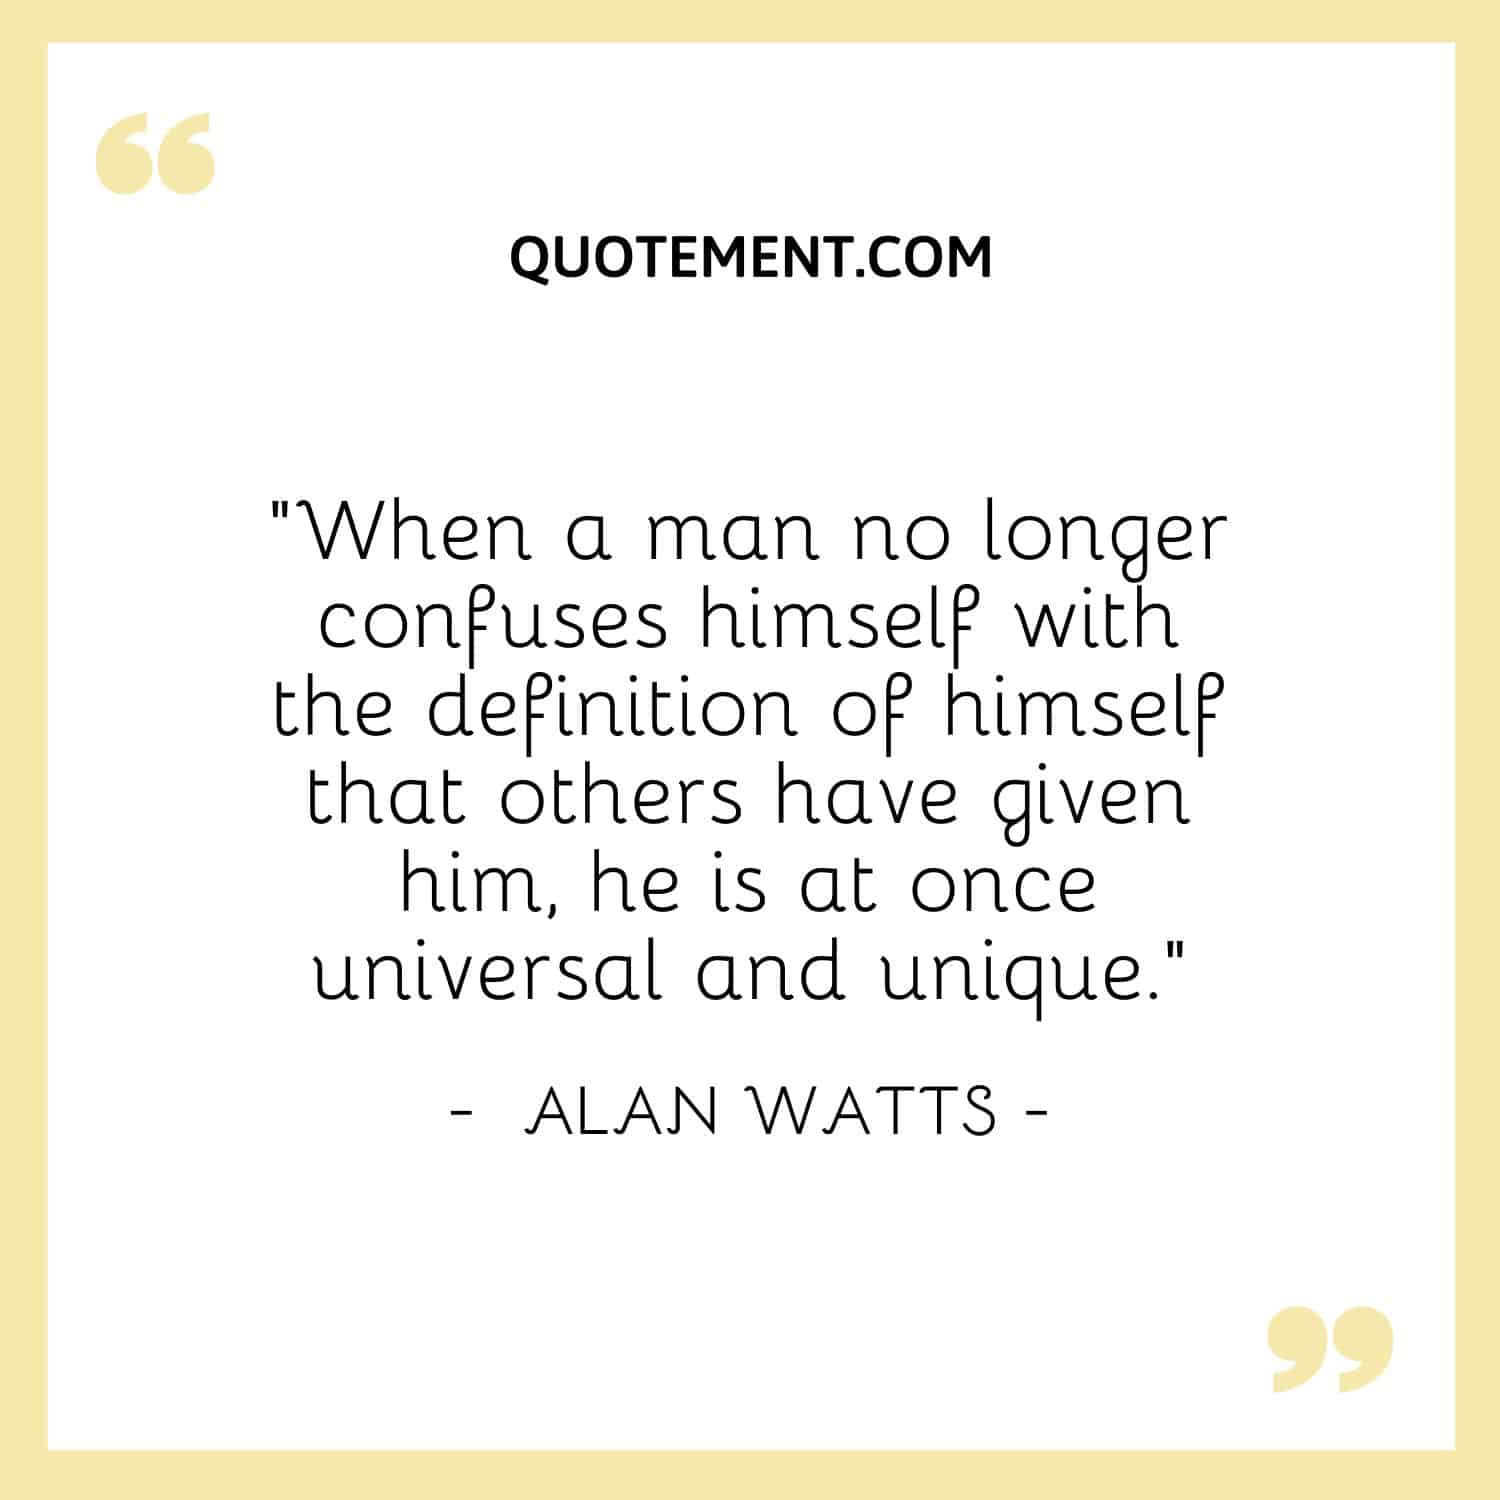 When a man no longer confuses himself with the definition of himself that others have given him, he is at once universal and unique